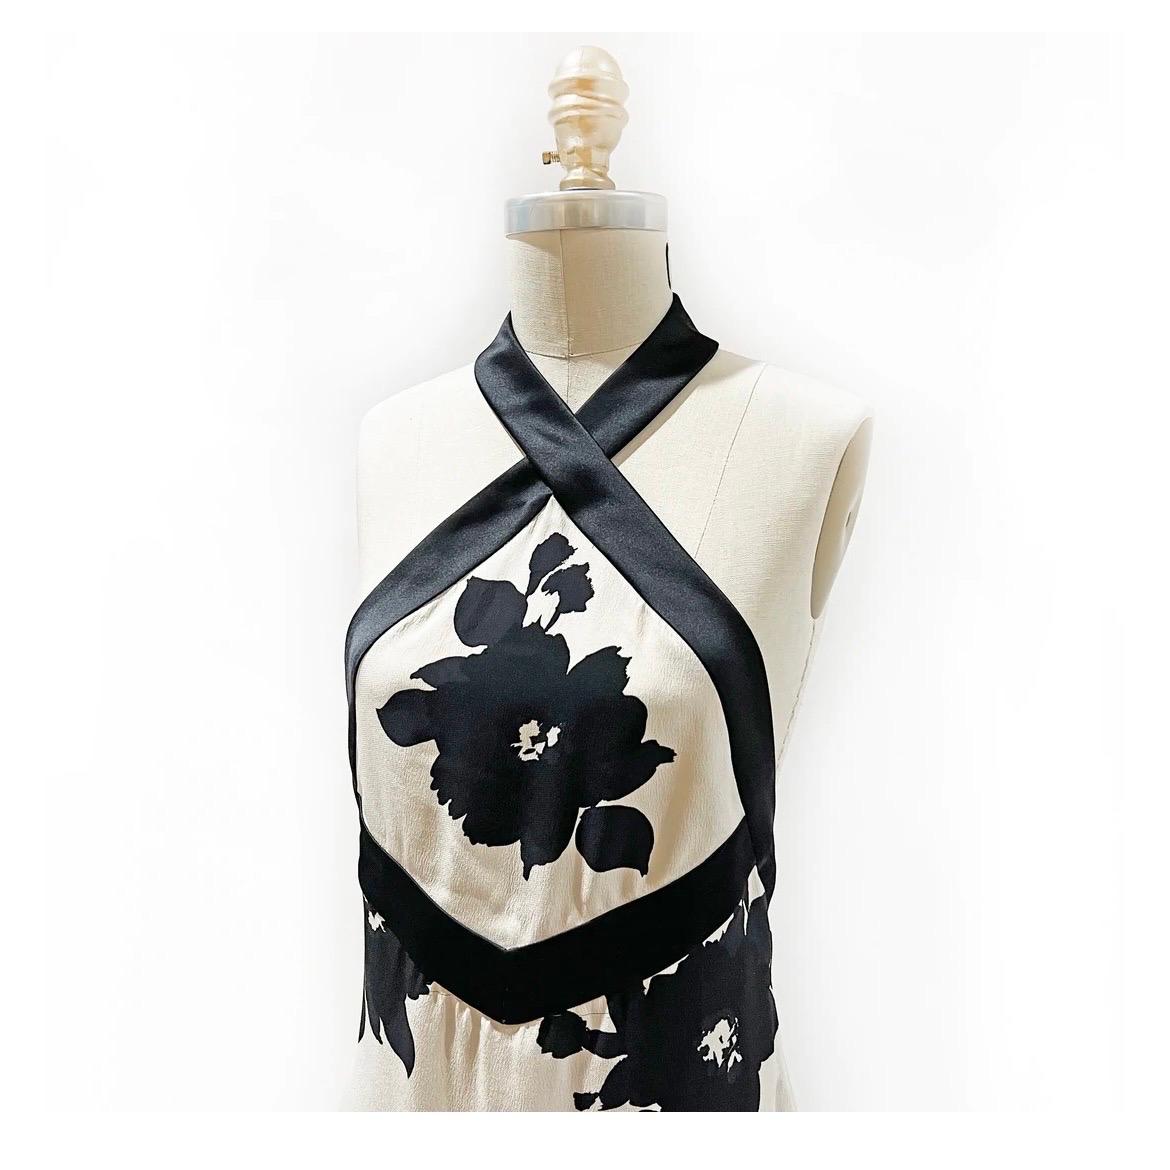 James Galanos Halterneck Gown
Vintage 
Circa late 1980's or early 1990's 
Made in the United States 
Black and White 
Floral print 
Silk 
Black satin halter neckline 
Empire waist 
Column style gown 
Open back hits mid-back
Invisible zipper down